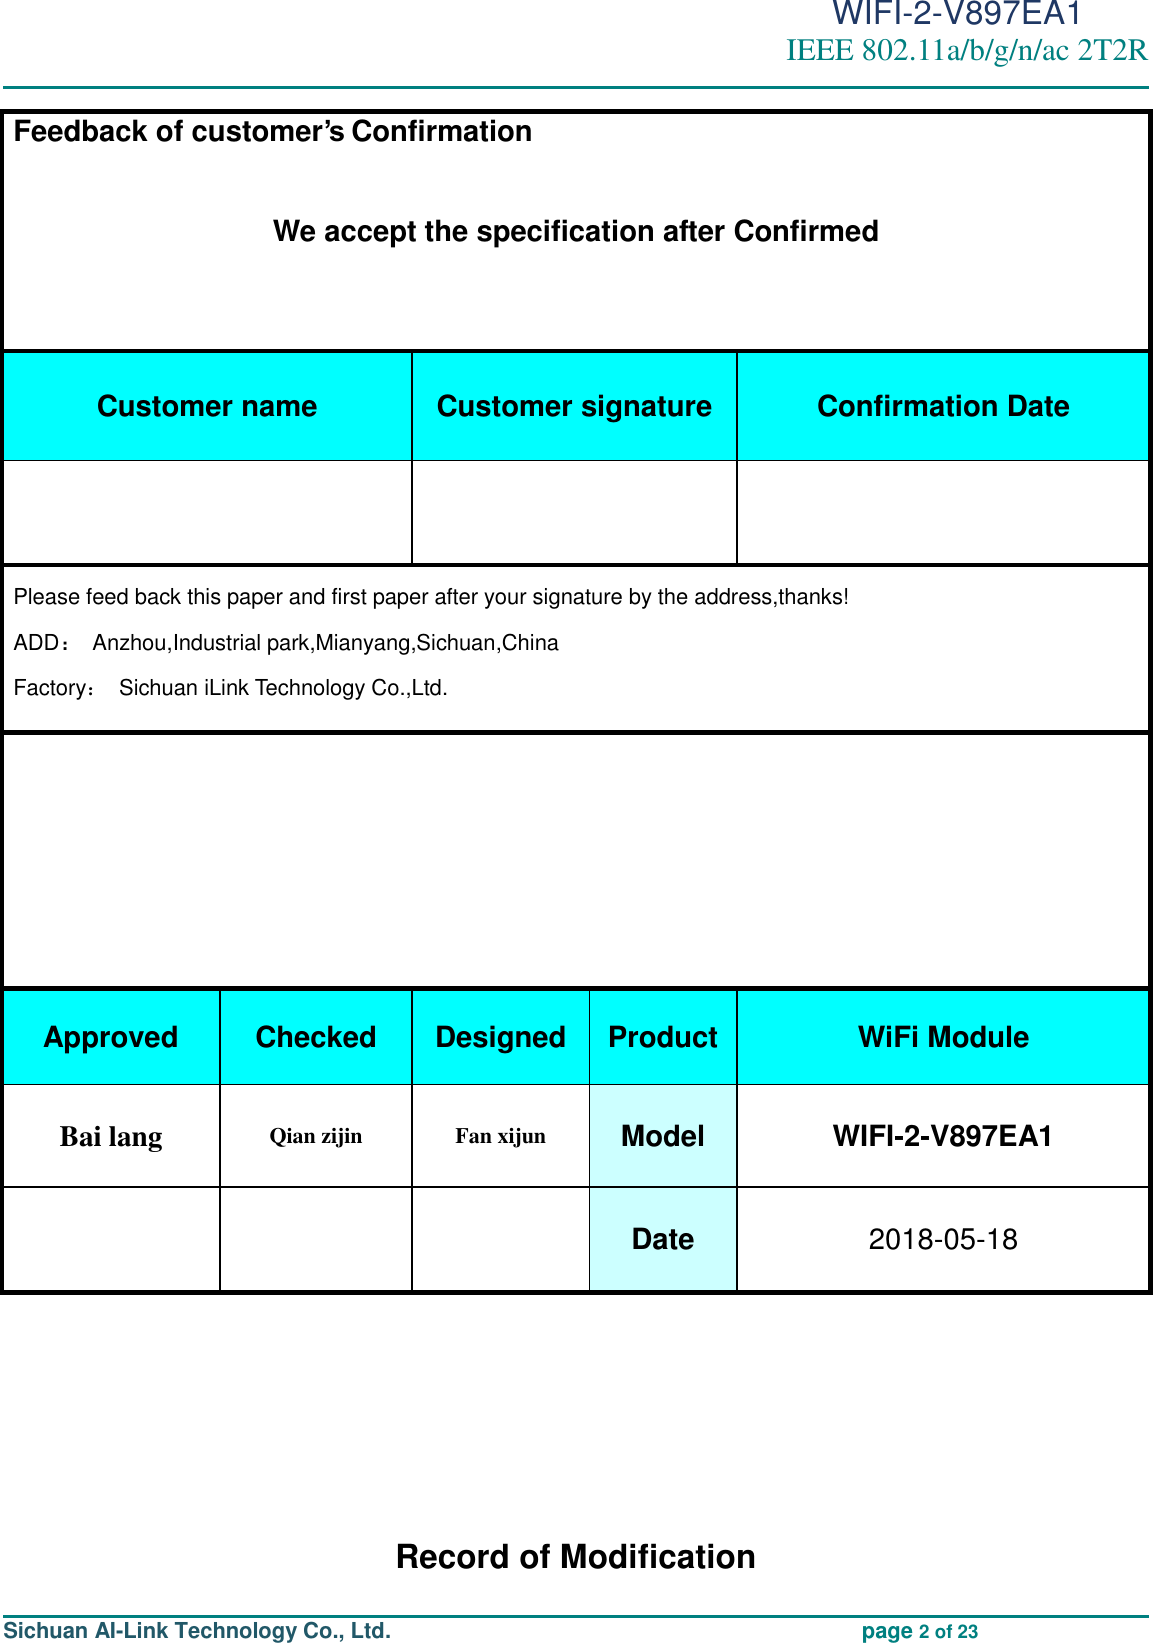                                                                                          WIFI-2-V897EA1 IEEE 802.11a/b/g/n/ac 2T2R                                                                                                                                                                                                                                                                                                                                                                                                                     Sichuan AI-Link Technology Co., Ltd.                                             page 2 of 23       Record of Modification Feedback of customer’s Confirmation         We accept the specification after Confirmed    Customer name Customer signature Confirmation Date    Please feed back this paper and first paper after your signature by the address,thanks! ADD： Anzhou,Industrial park,Mianyang,Sichuan,China Factory：  Sichuan iLink Technology Co.,Ltd.            Approved Checked Designed Product WiFi Module Bai lang Qian zijin Fan xijun Model WIFI-2-V897EA1    Date 2018-05-18 